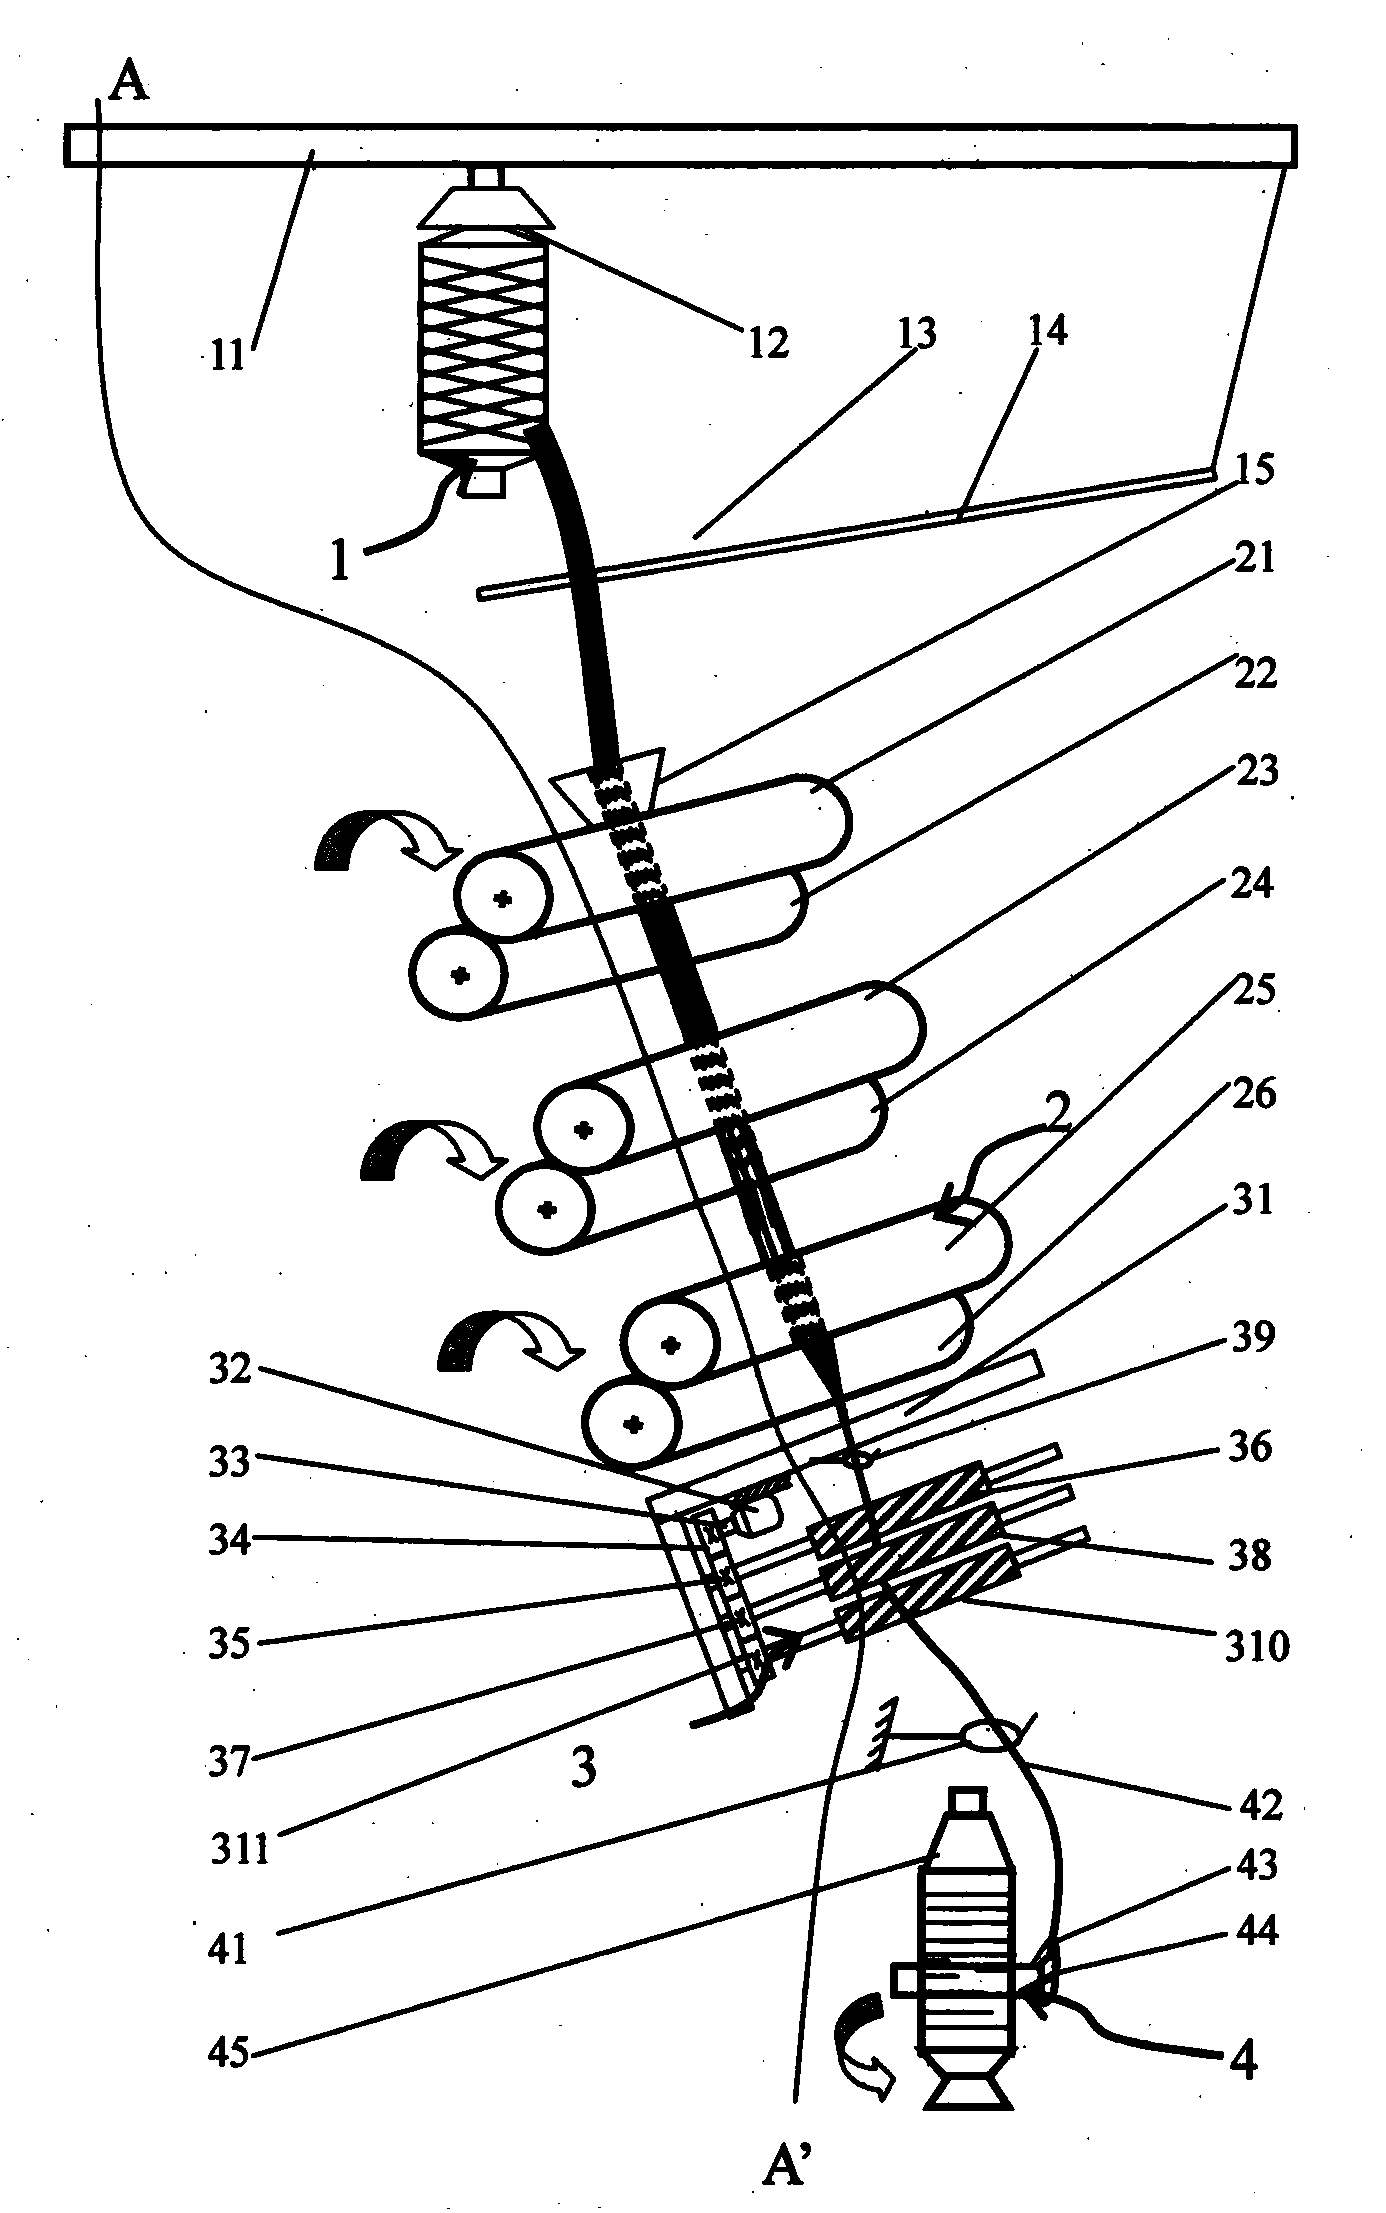 Three-point mutual wrapping and winding type spun yarn evening and ordering device and method